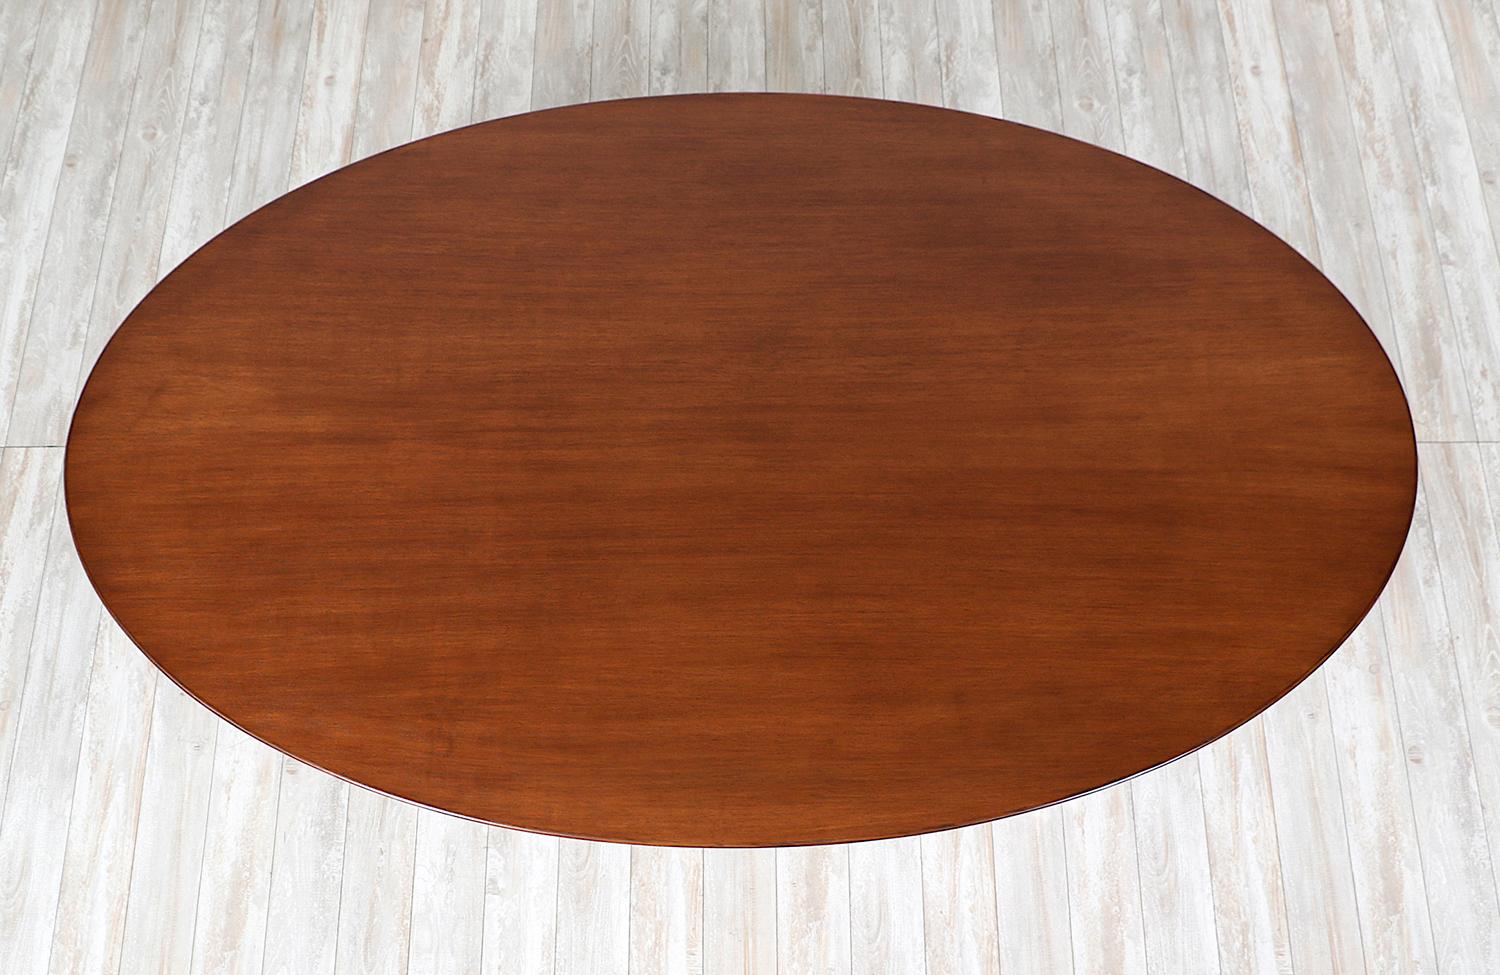 Florence Knoll Walnut & Chrome Oval Dining Table or Desk for Knoll Inc. For Sale 1